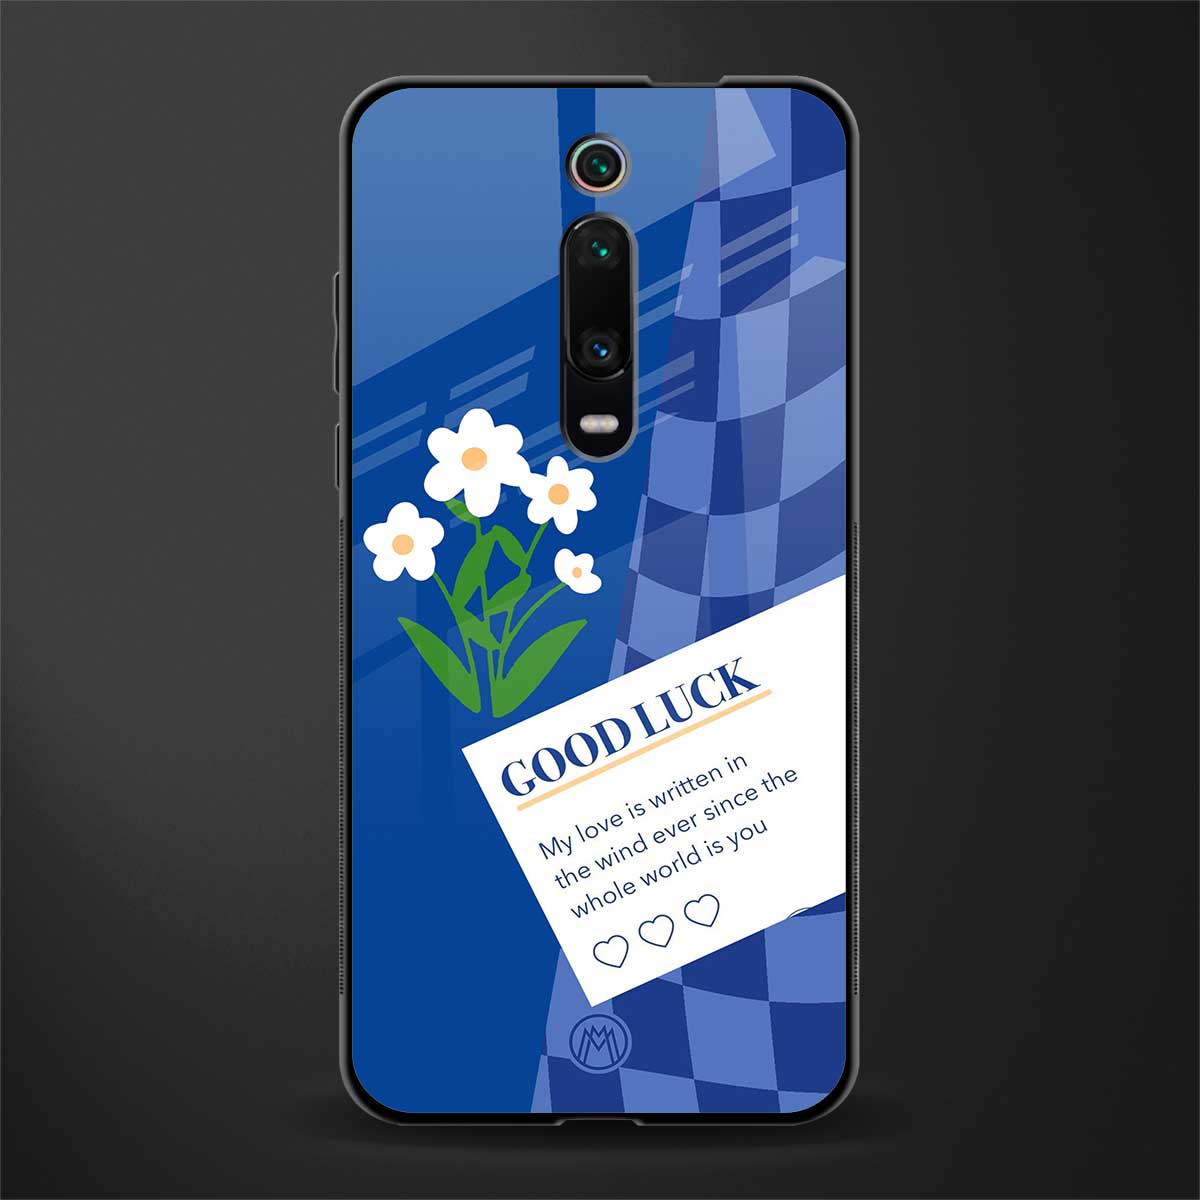 you're my world blue edition glass case for redmi k20 pro image